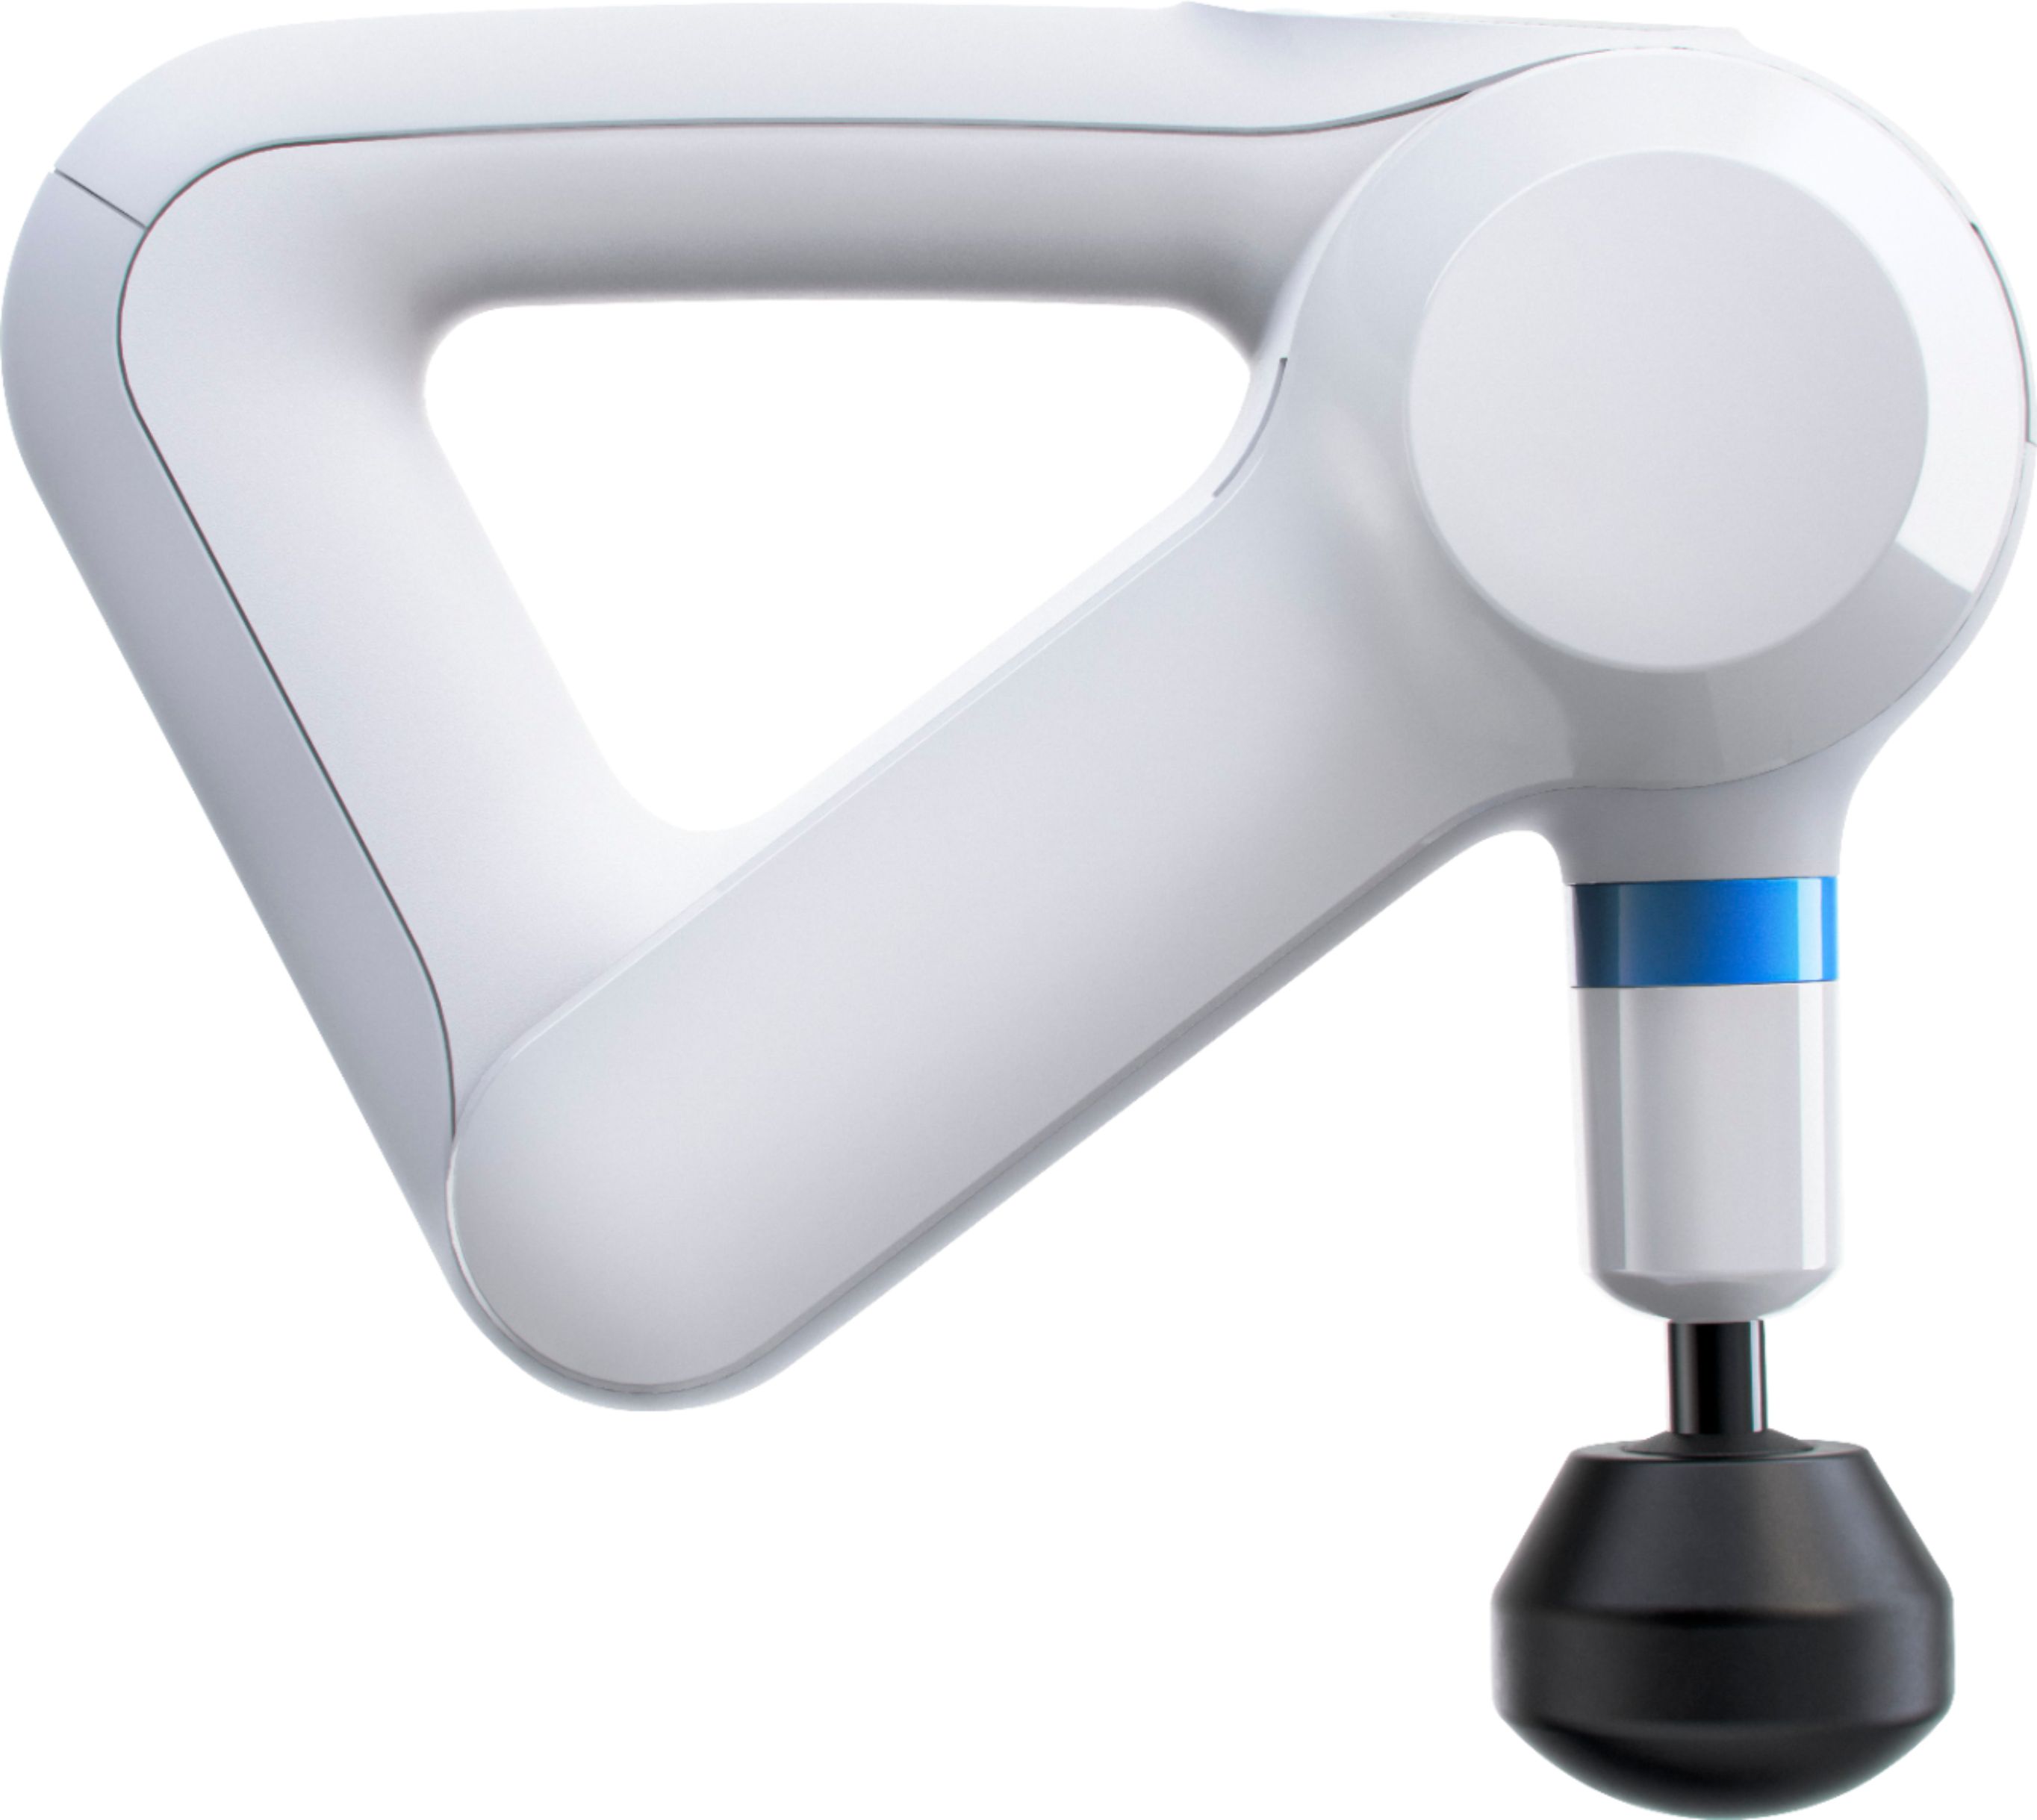 Left View: Therabody - Theragun Elite Bluetooth + App Enabled Massage Gun + 5 Attachments, 40lbs Force (Latest Model) - White